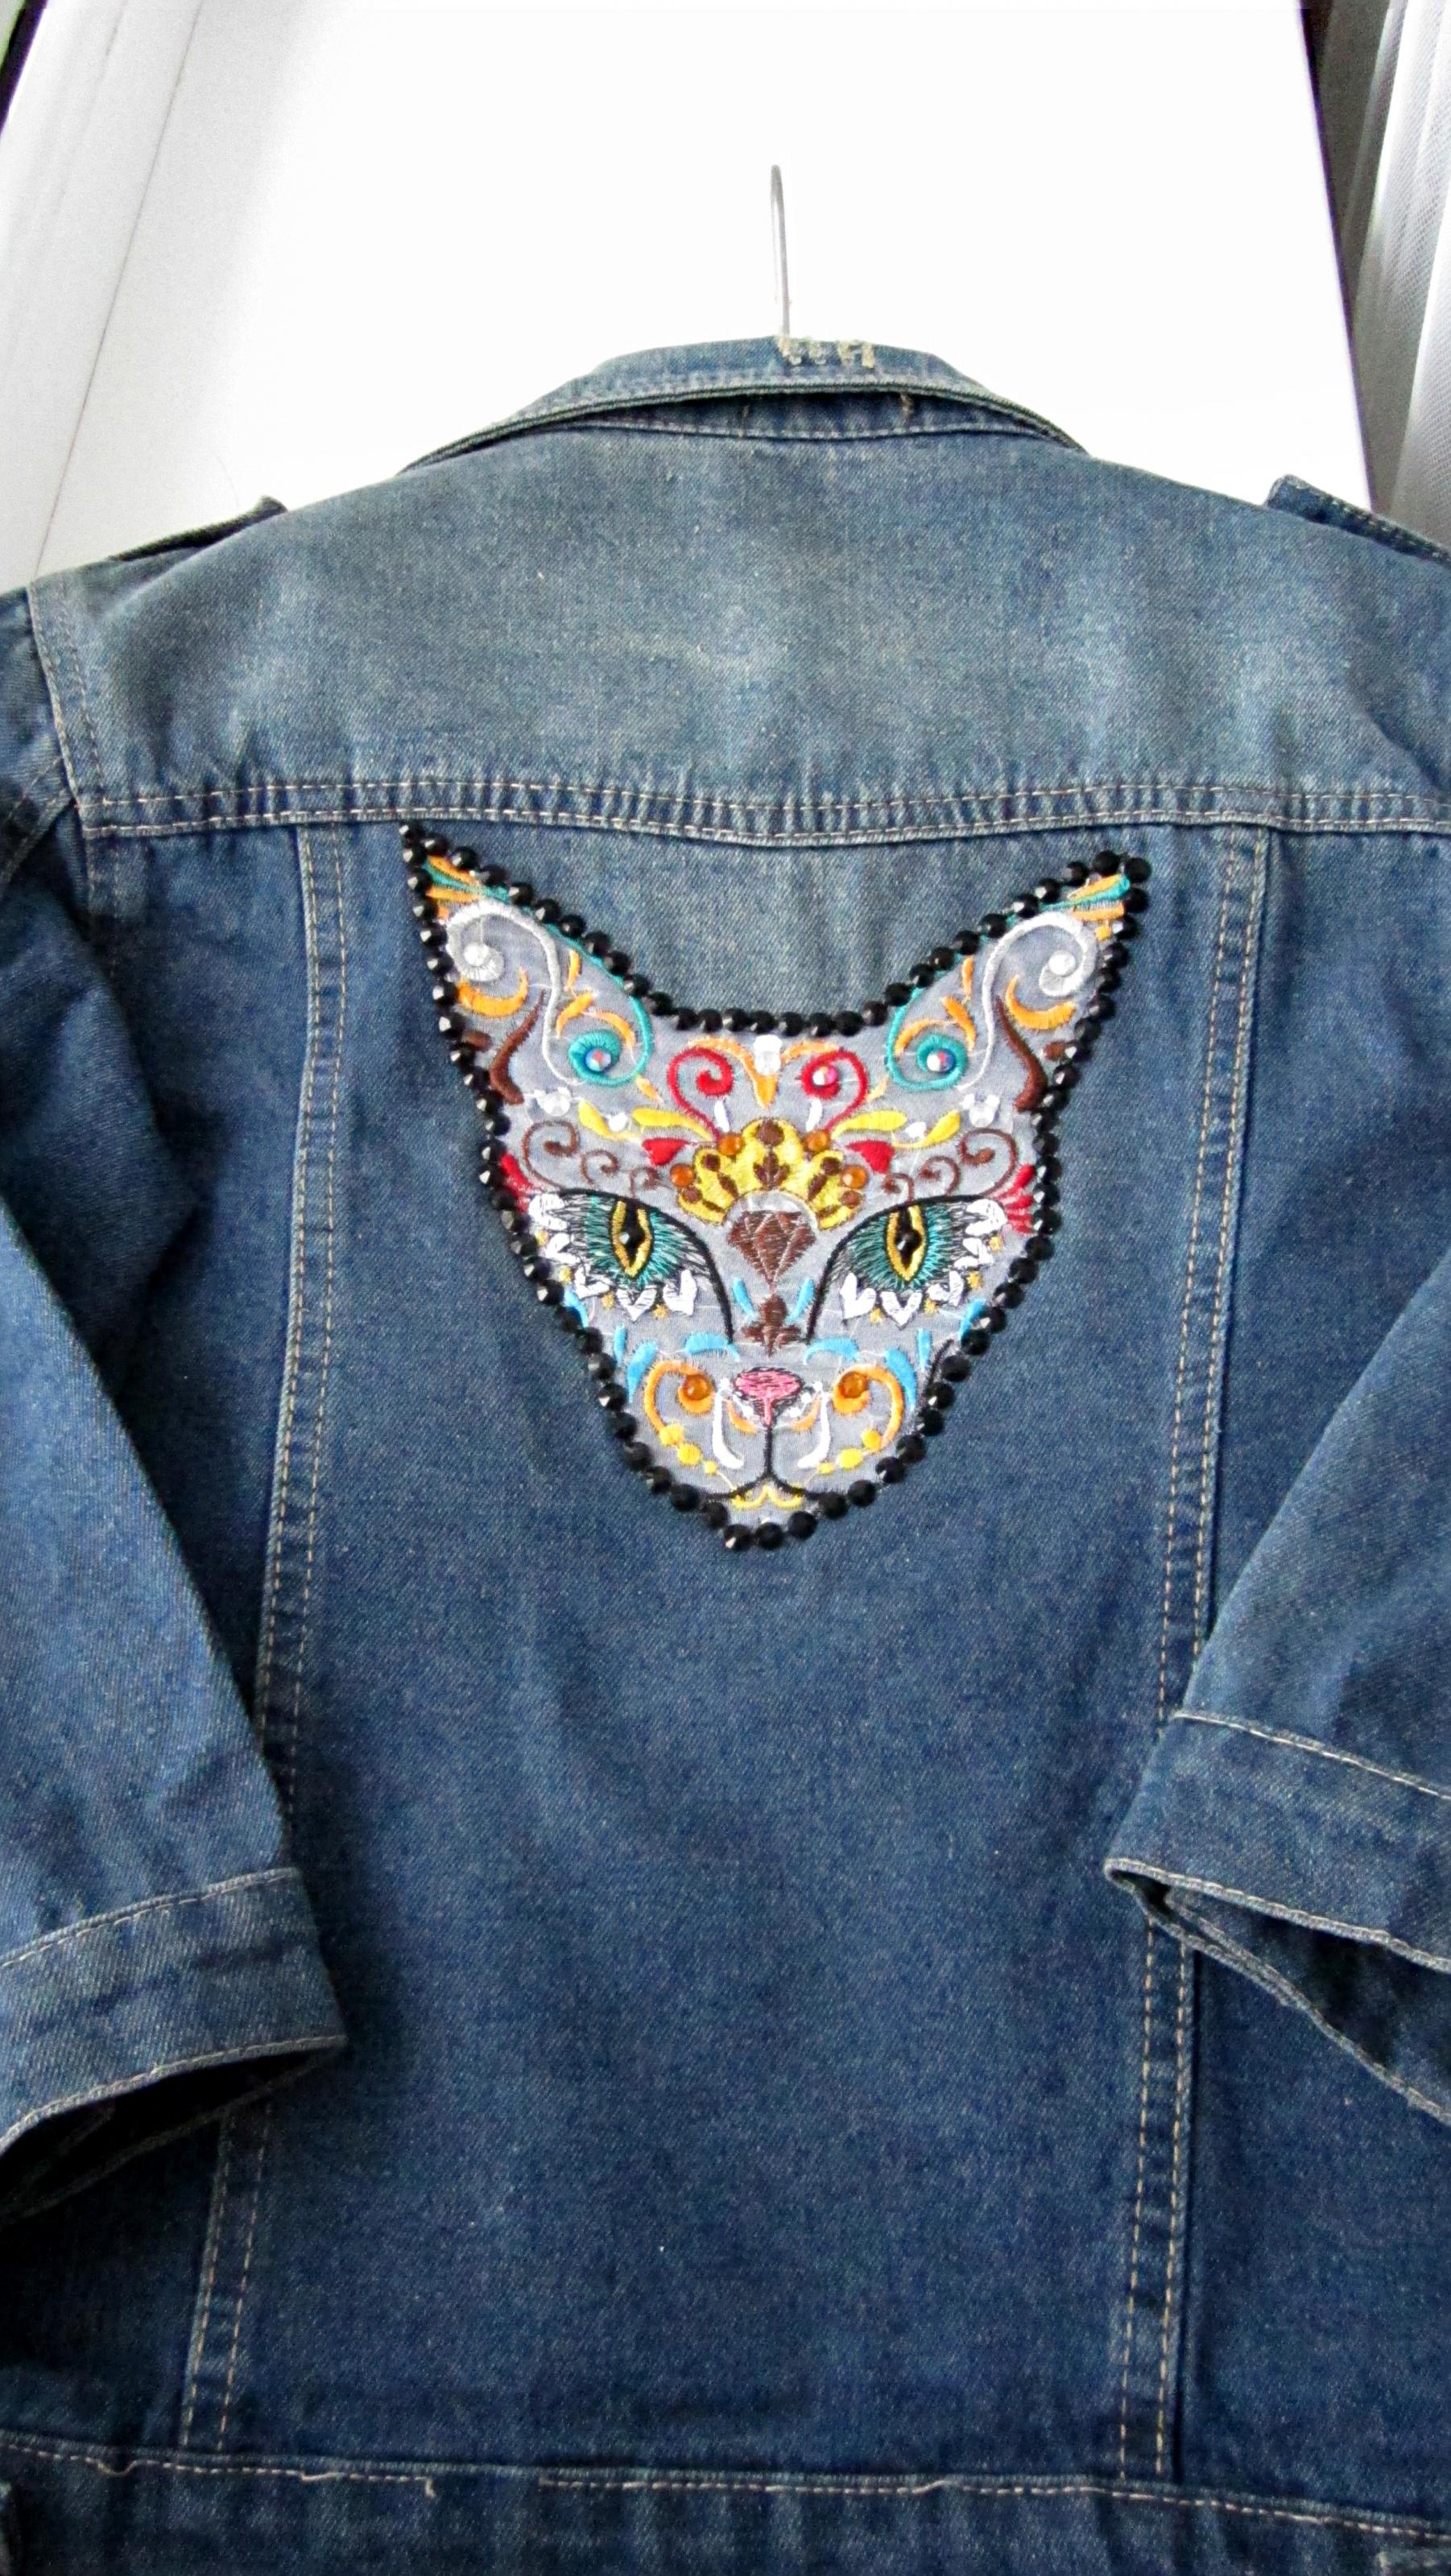 Denim jacket with Mexican cat embroidery design